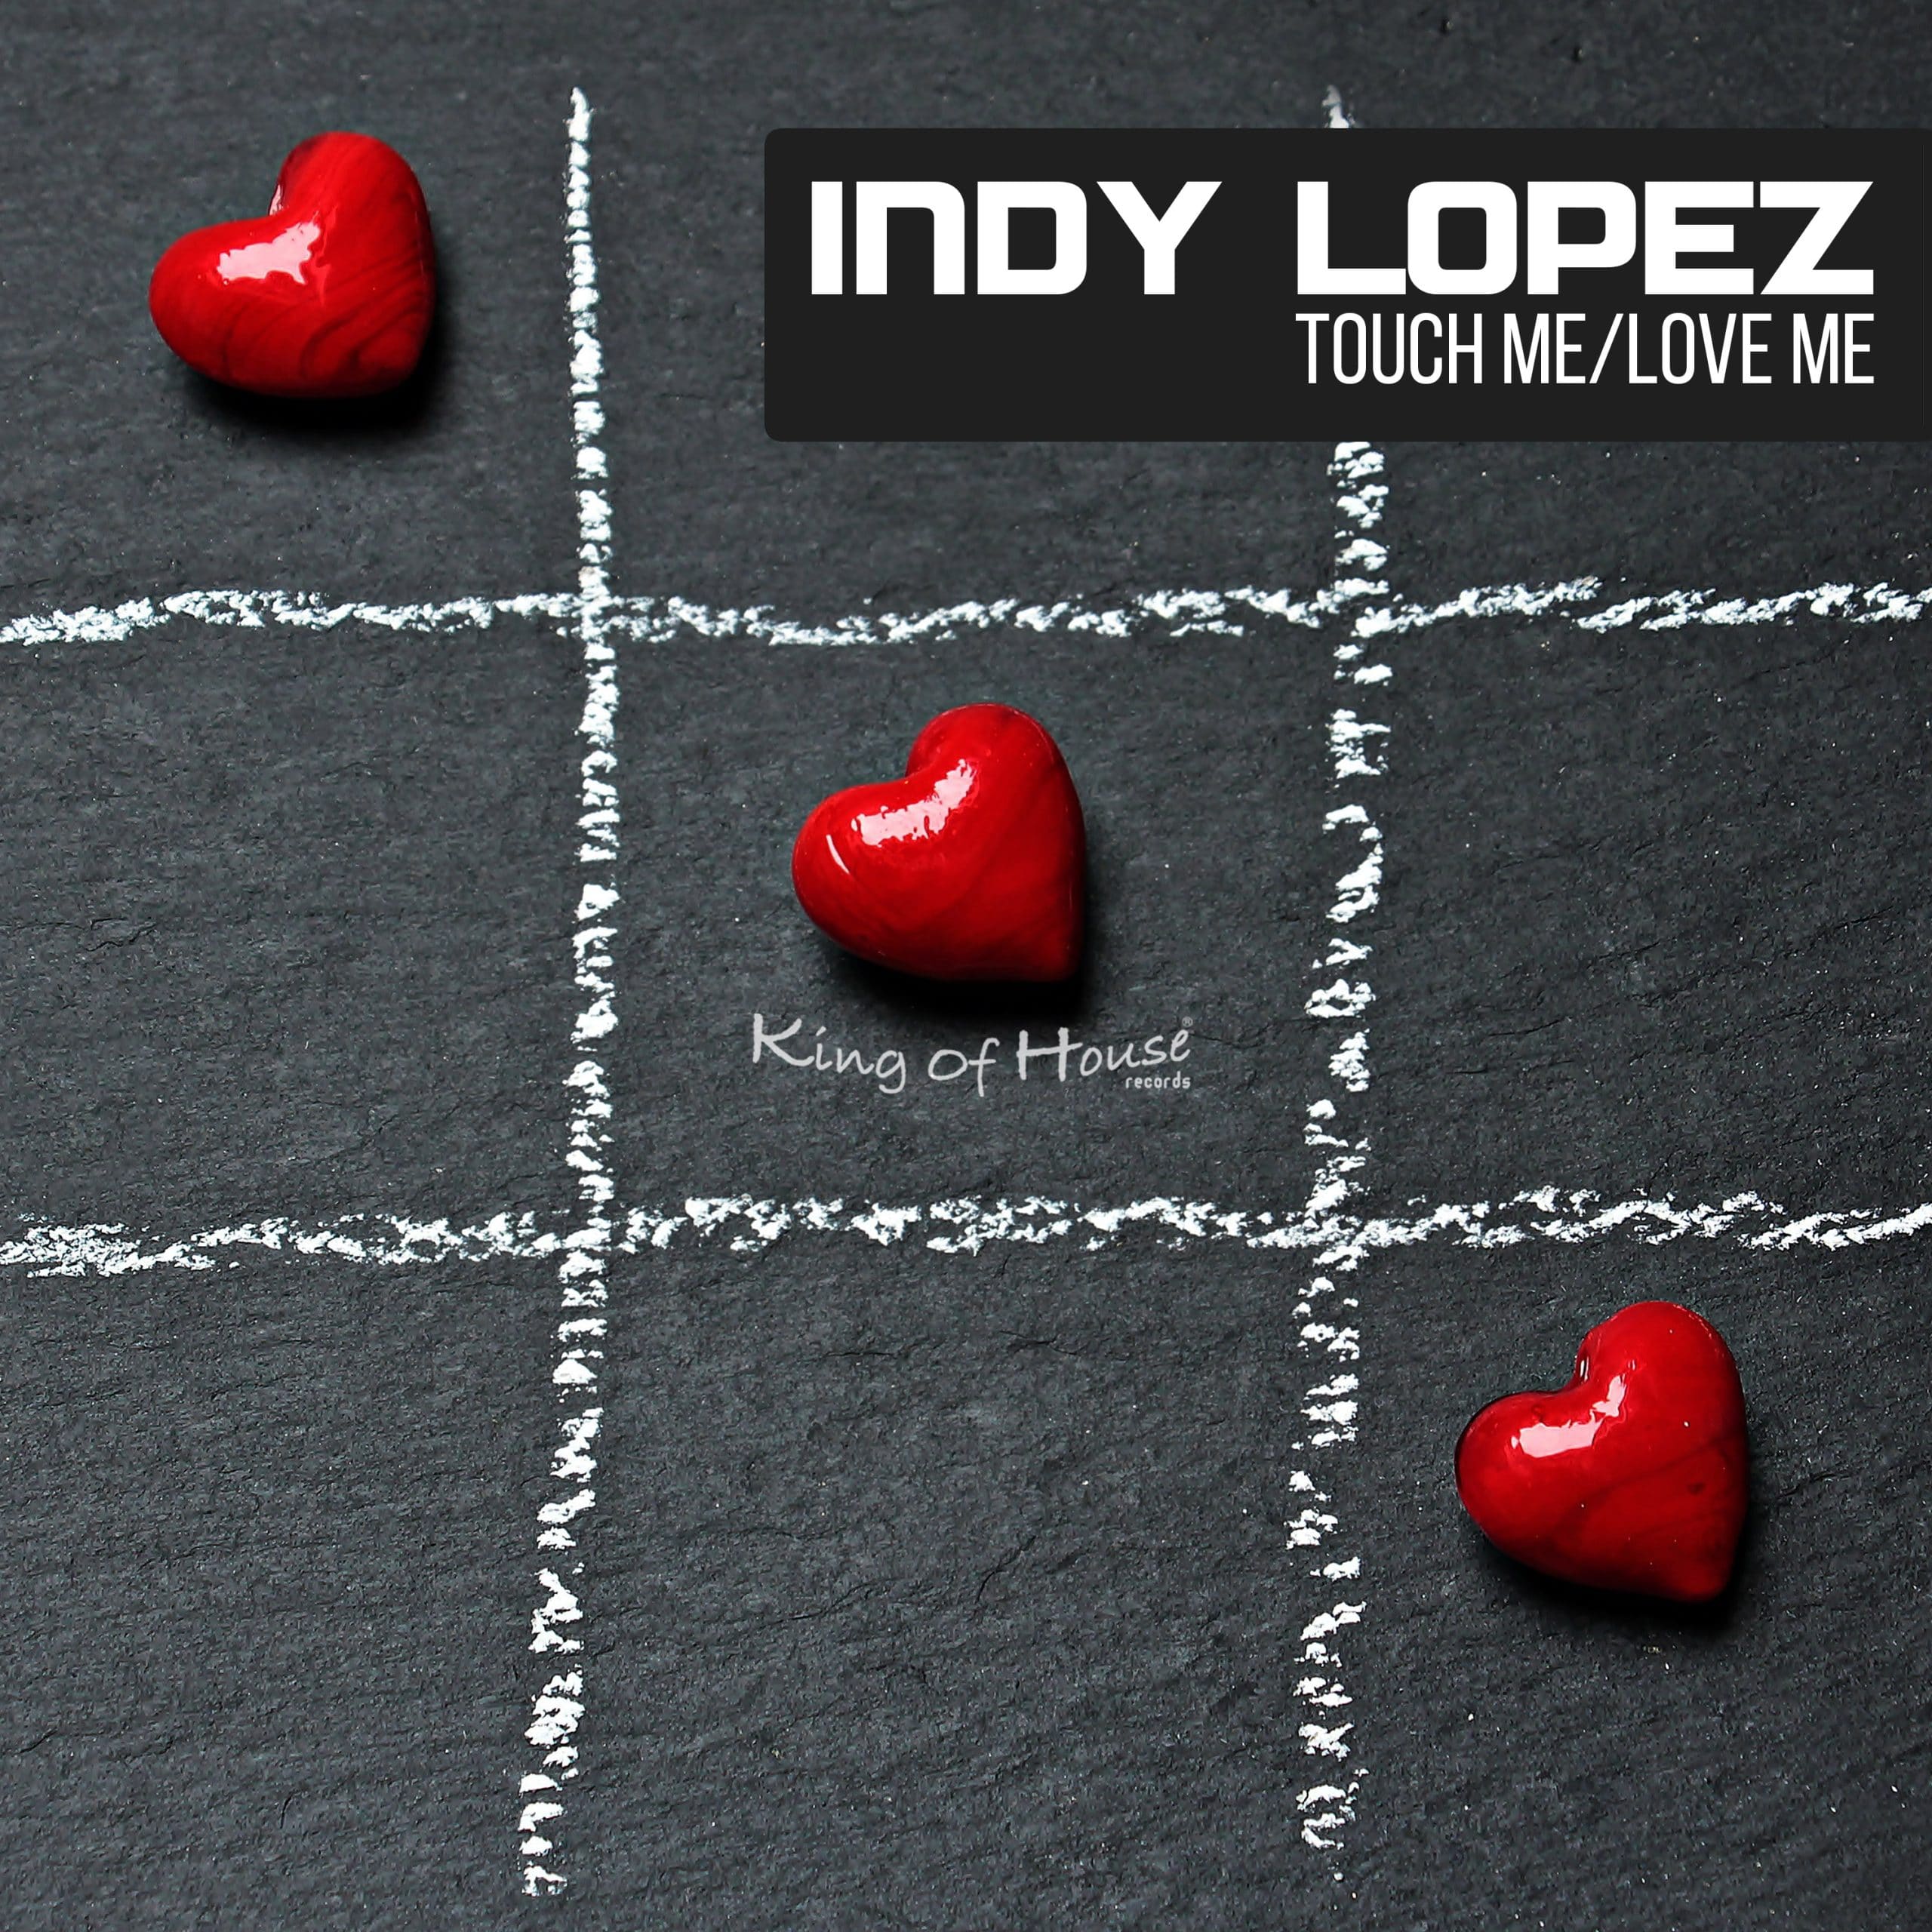 Indy Lopez Touch Me Love me (Art) King Of House records